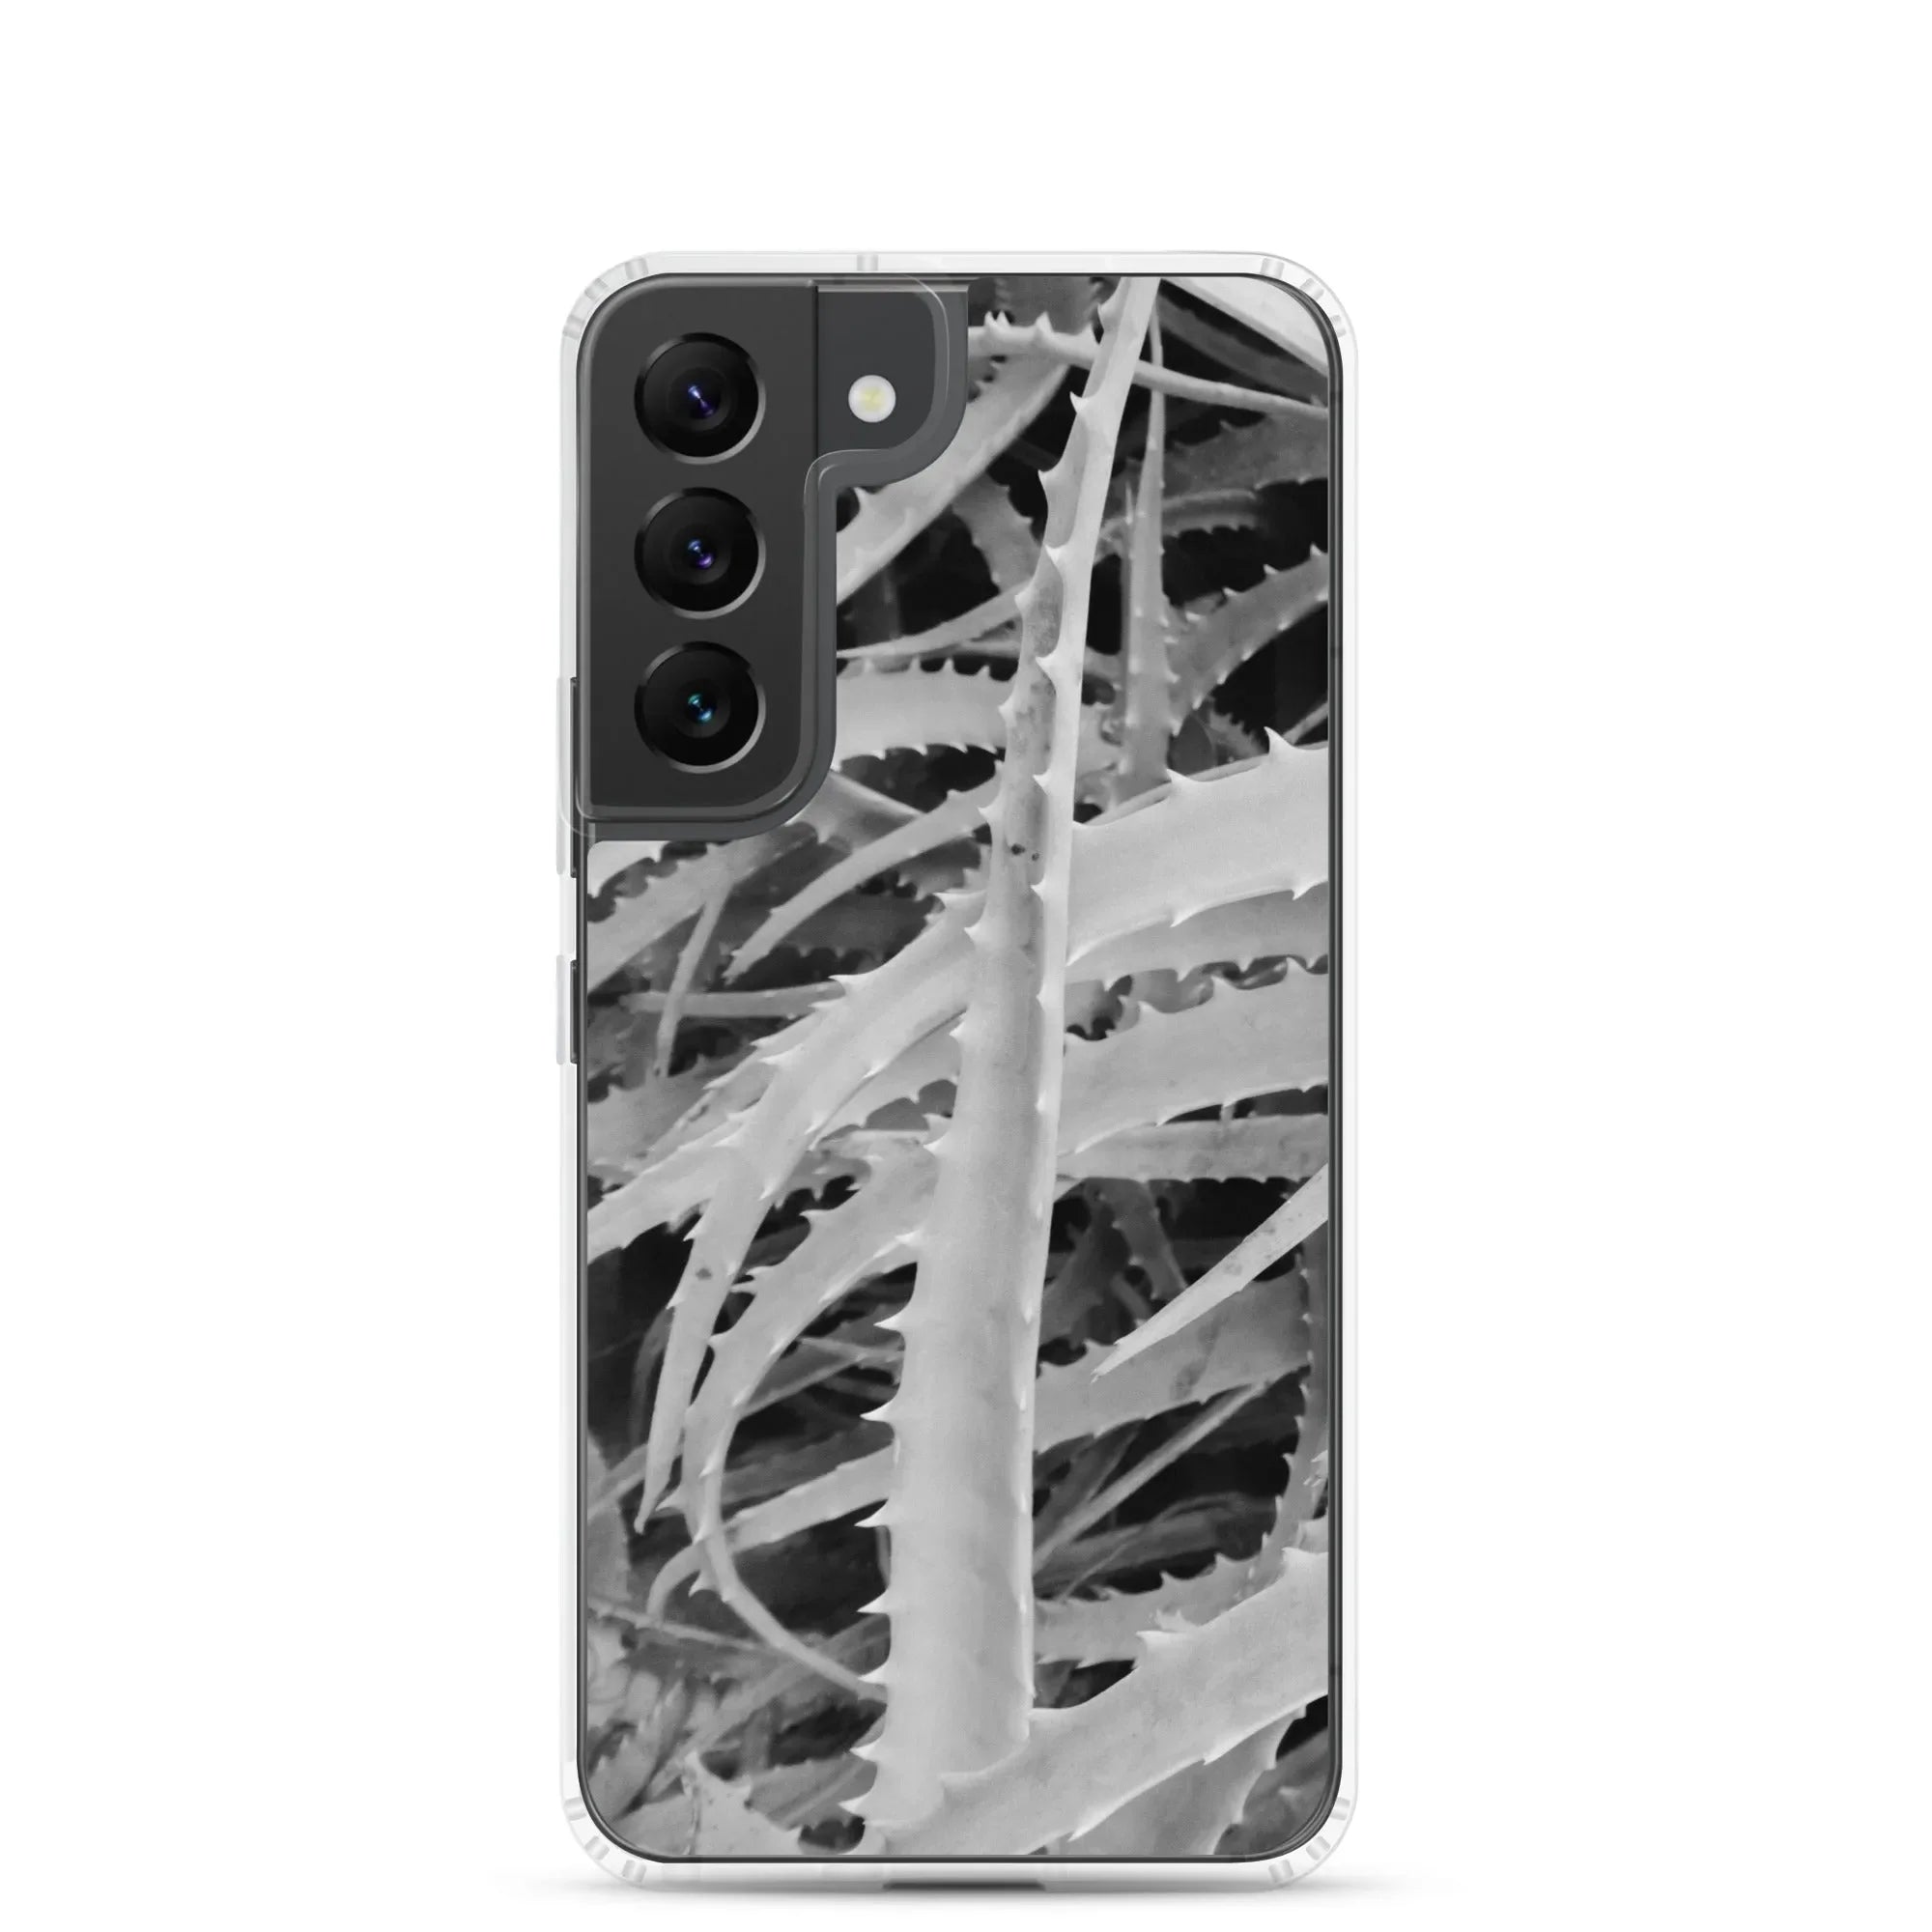 Spiked Samsung Galaxy Case - Black And White - Samsung Galaxy S22 - Mobile Phone Cases - Aesthetic Art